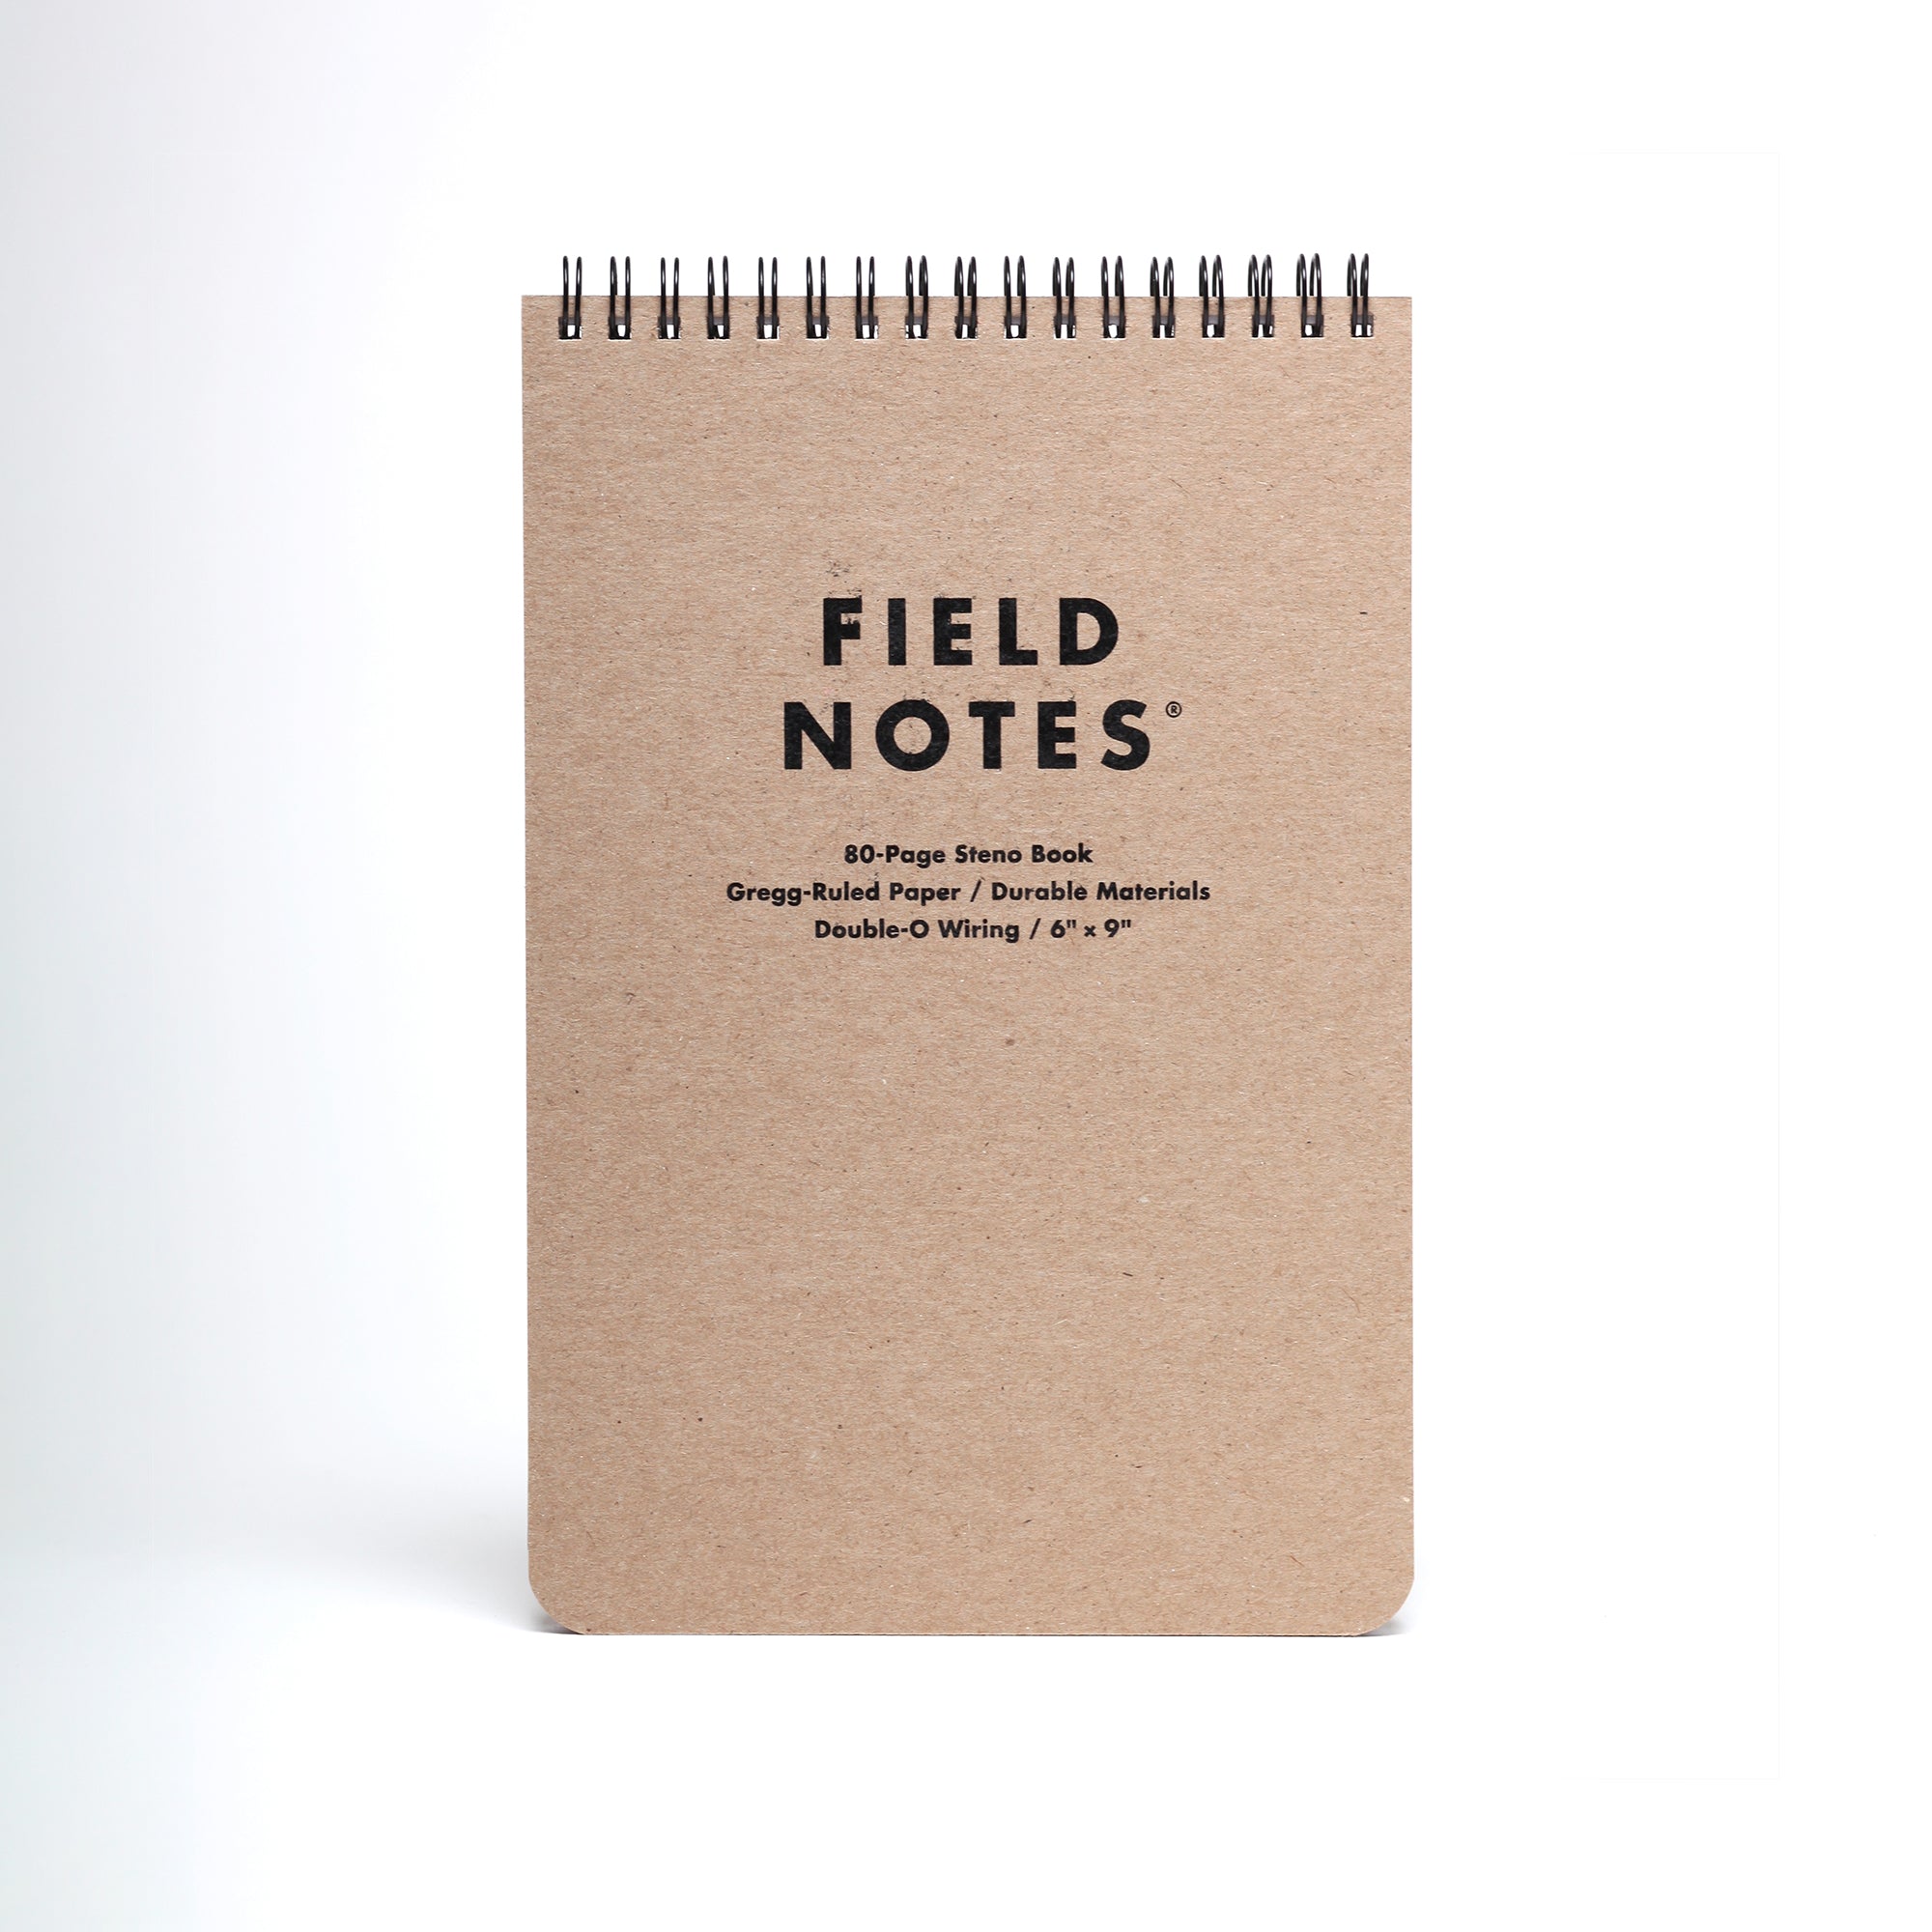 Field Notes – An Expedition Into Chinatown